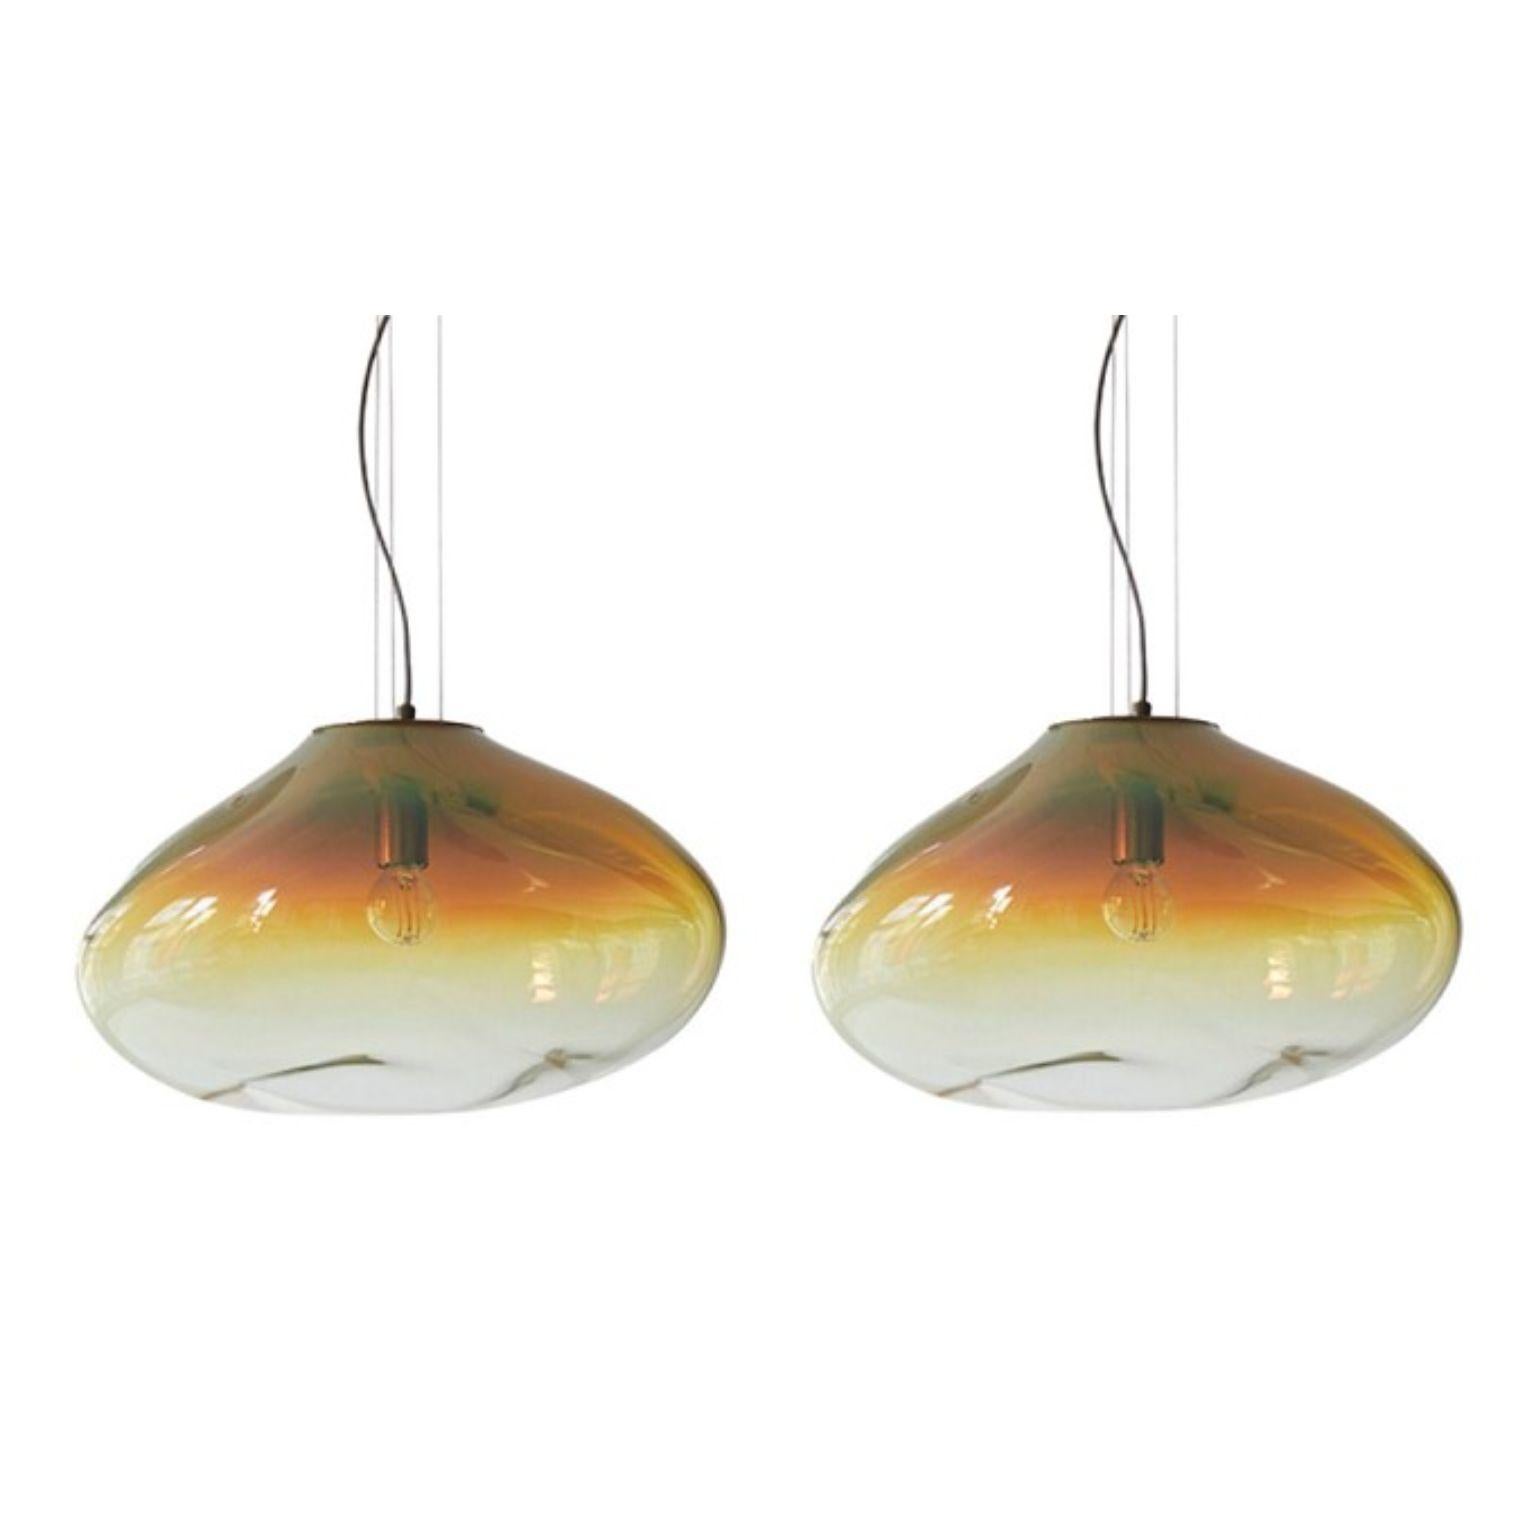 Set of 2 haumea amorph amber iridescent xl pendants by Eloa.
No UL listed 
Material: glass, steel, silver, LED bulb.
Dimensions: D 35 x W 47 x H 32 cm.
Also available in different colours and dimensions.

All our lamps can be wired according to each